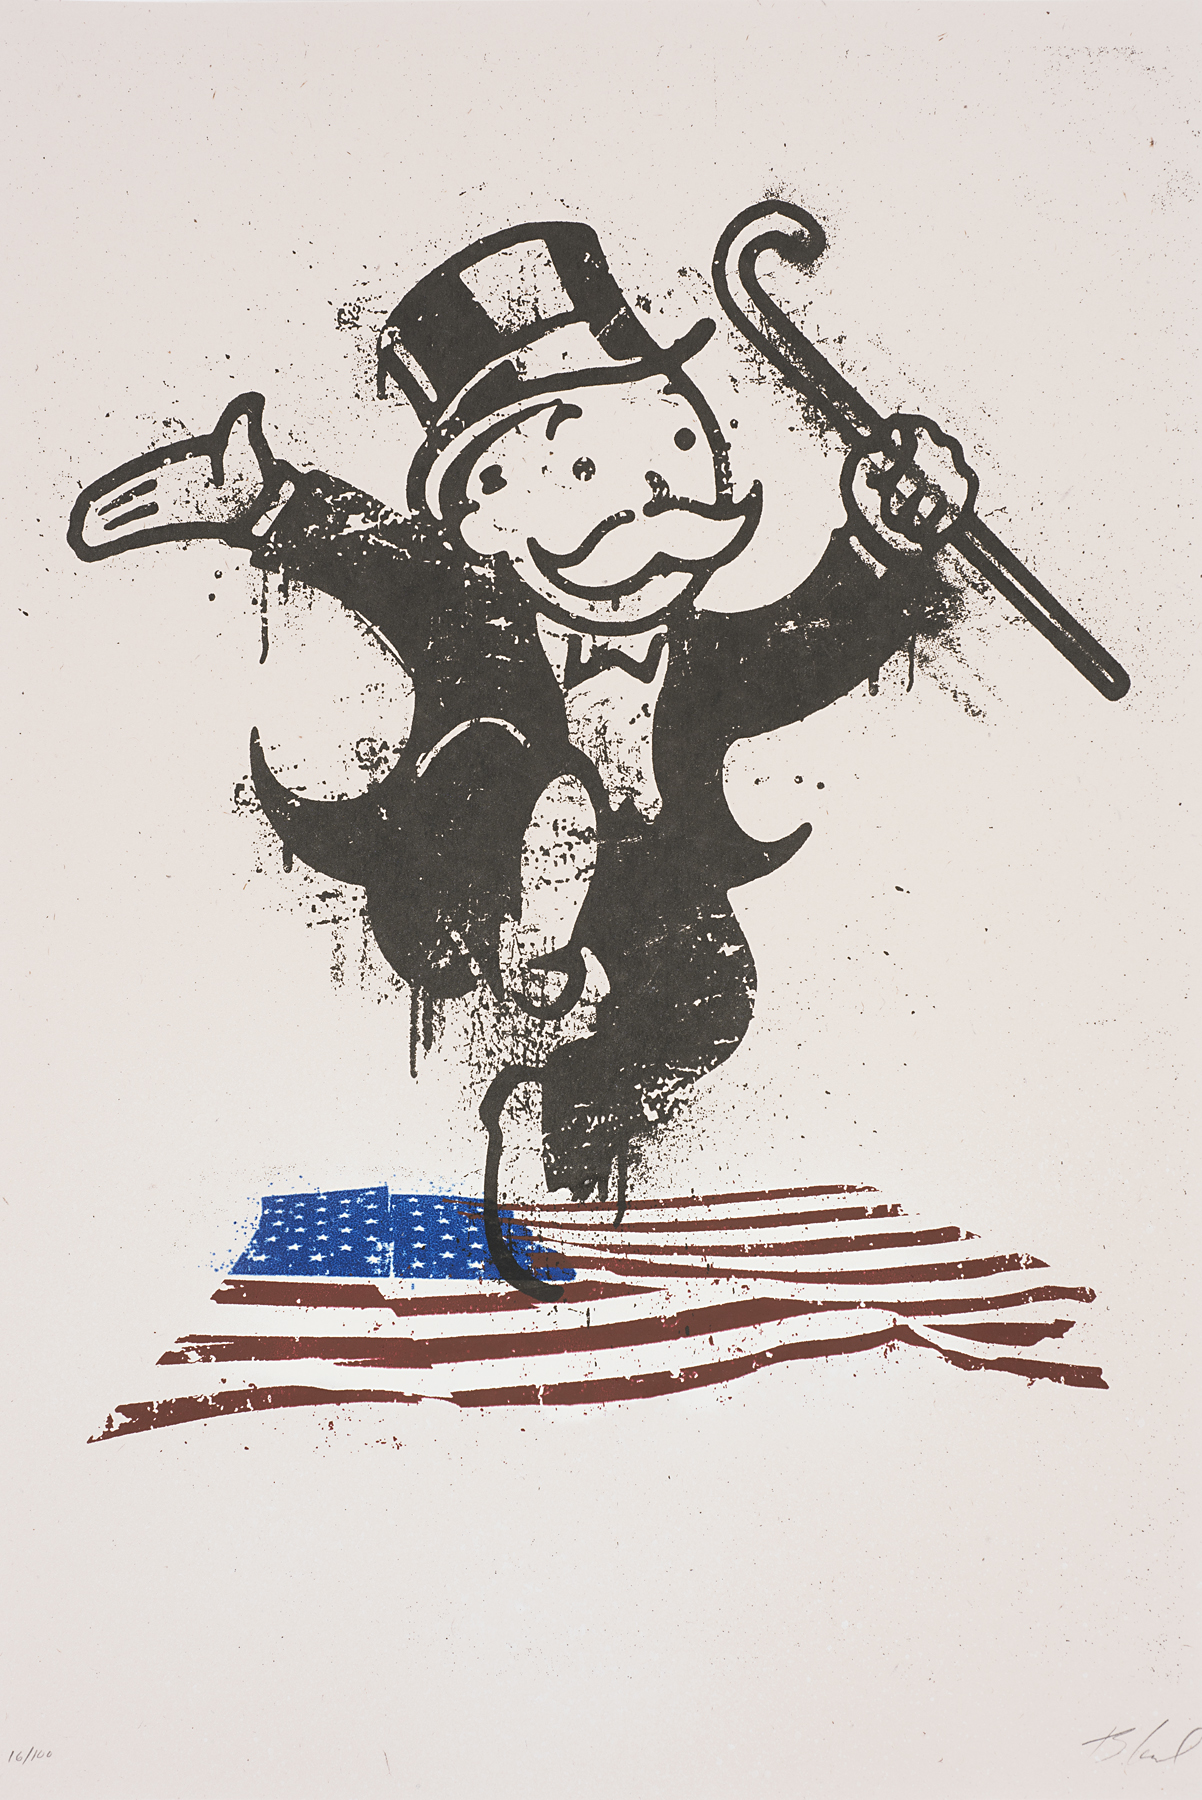 Cartoon-style male figure (identified as from the game Monopoly) dancing on a full-color United States flag. The figure is black and the background is beige.